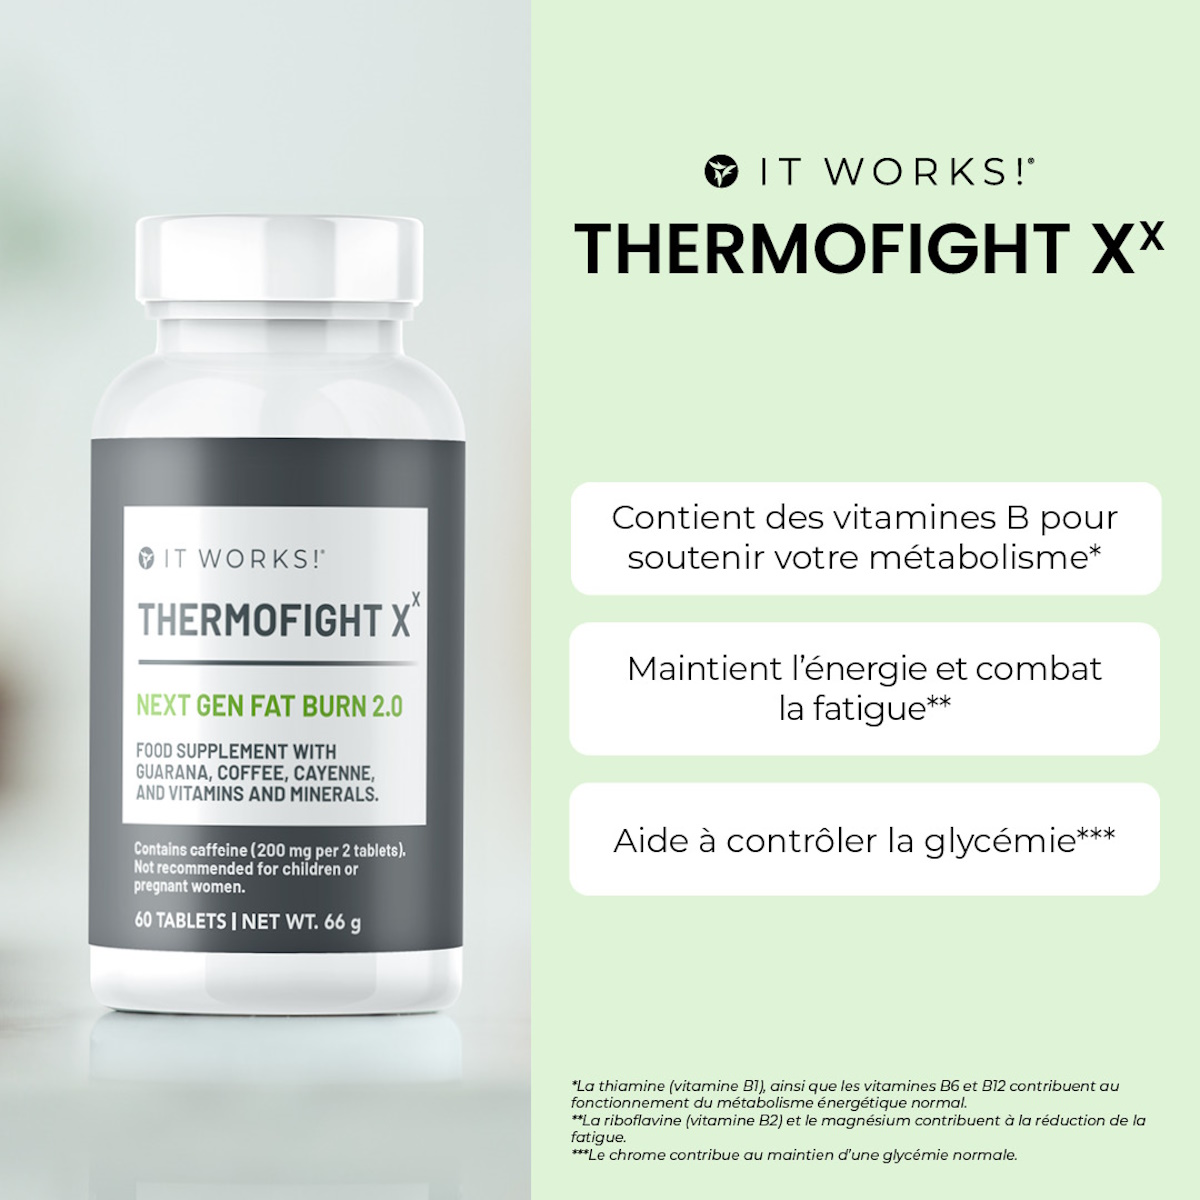 Avantages du Thermofight Xx It Works